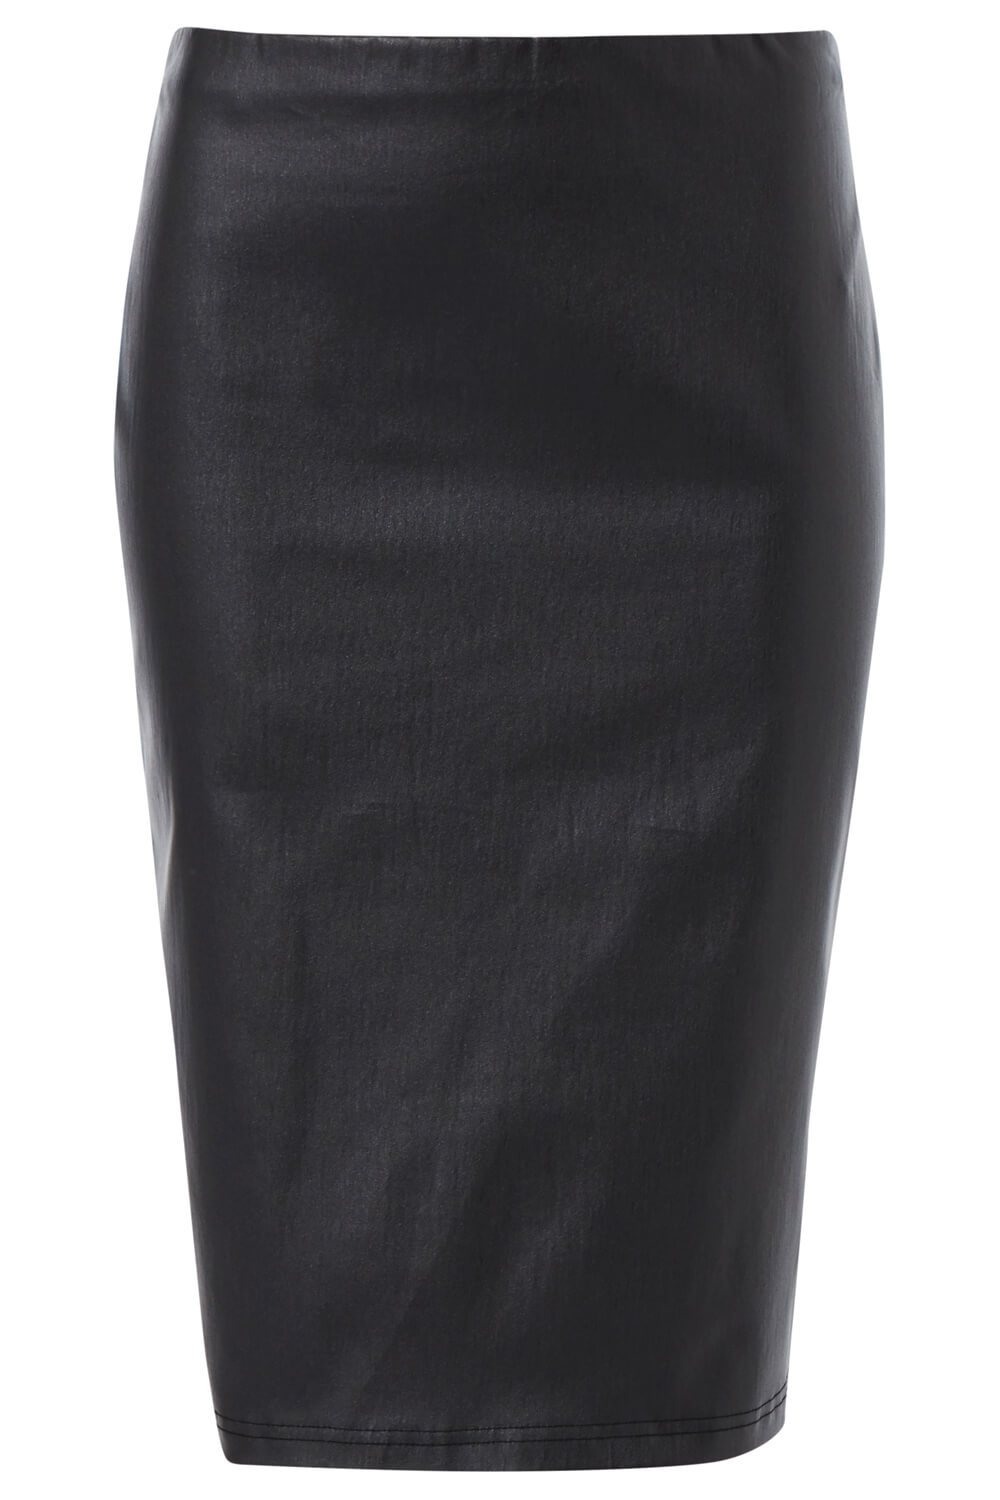 PEWTER Faux Leather Pull On Pencil Skirt, Image 5 of 5